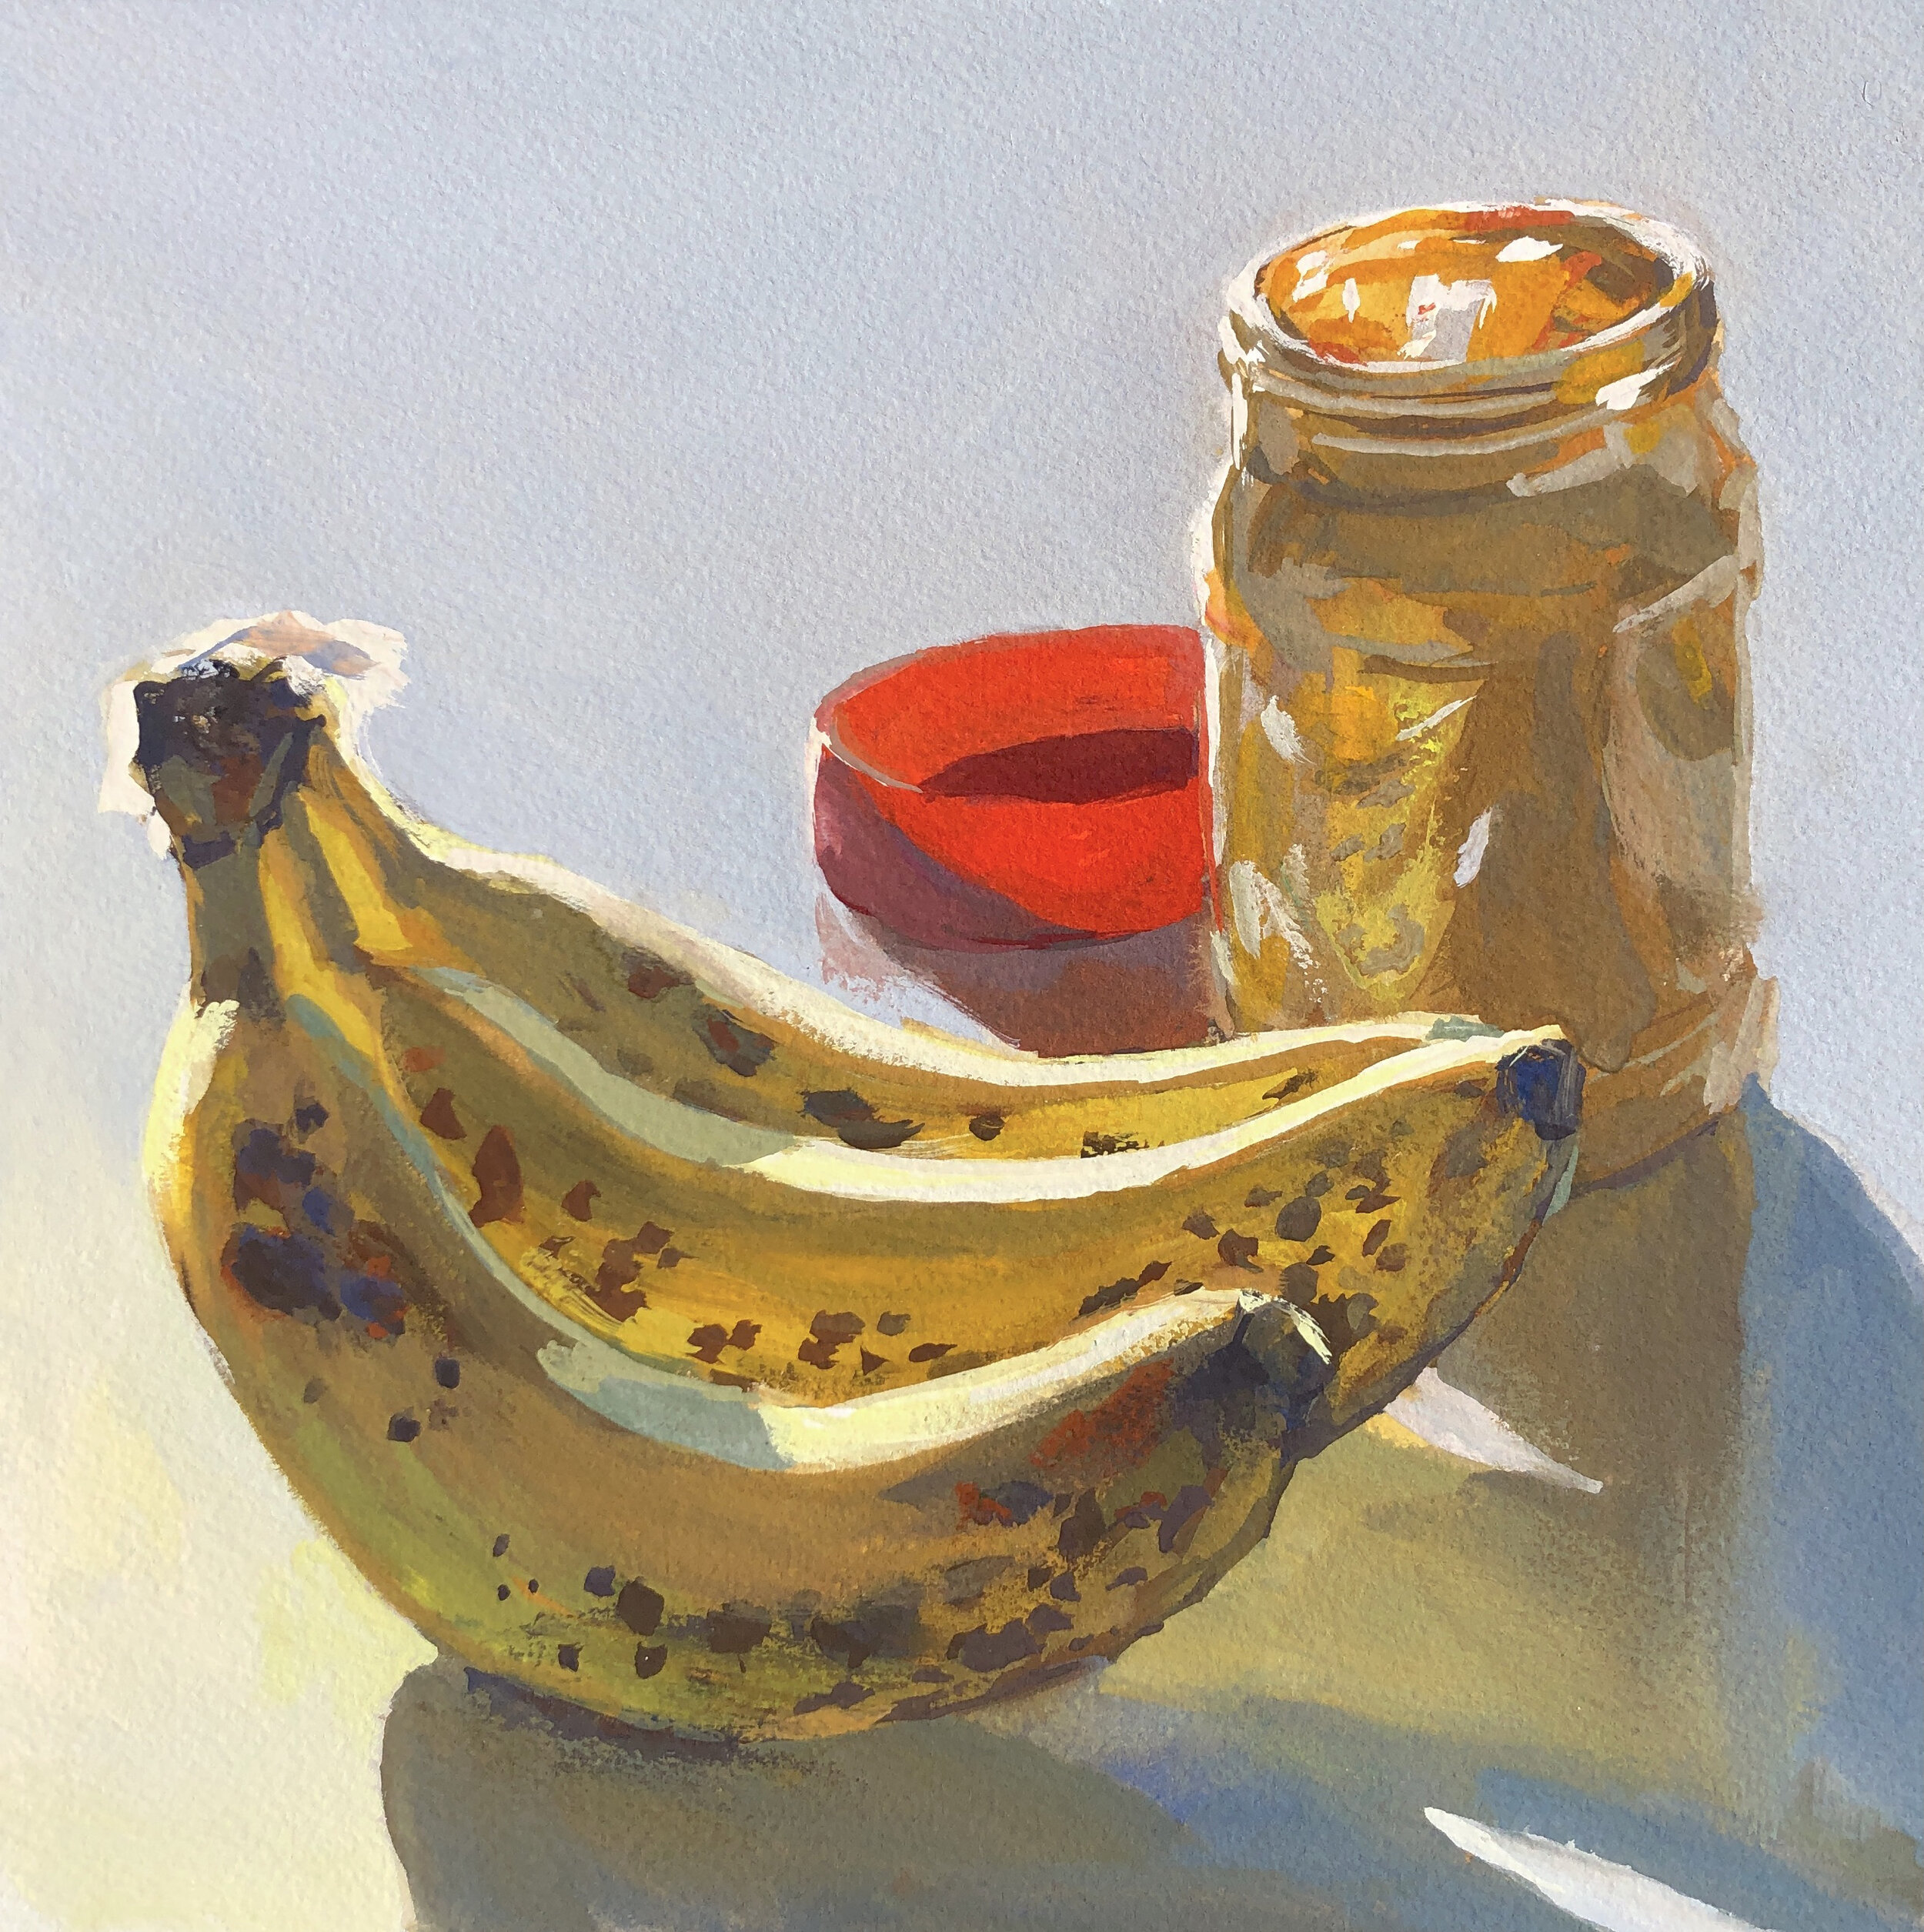 Bananas and Peanut Butter by Heather Martin